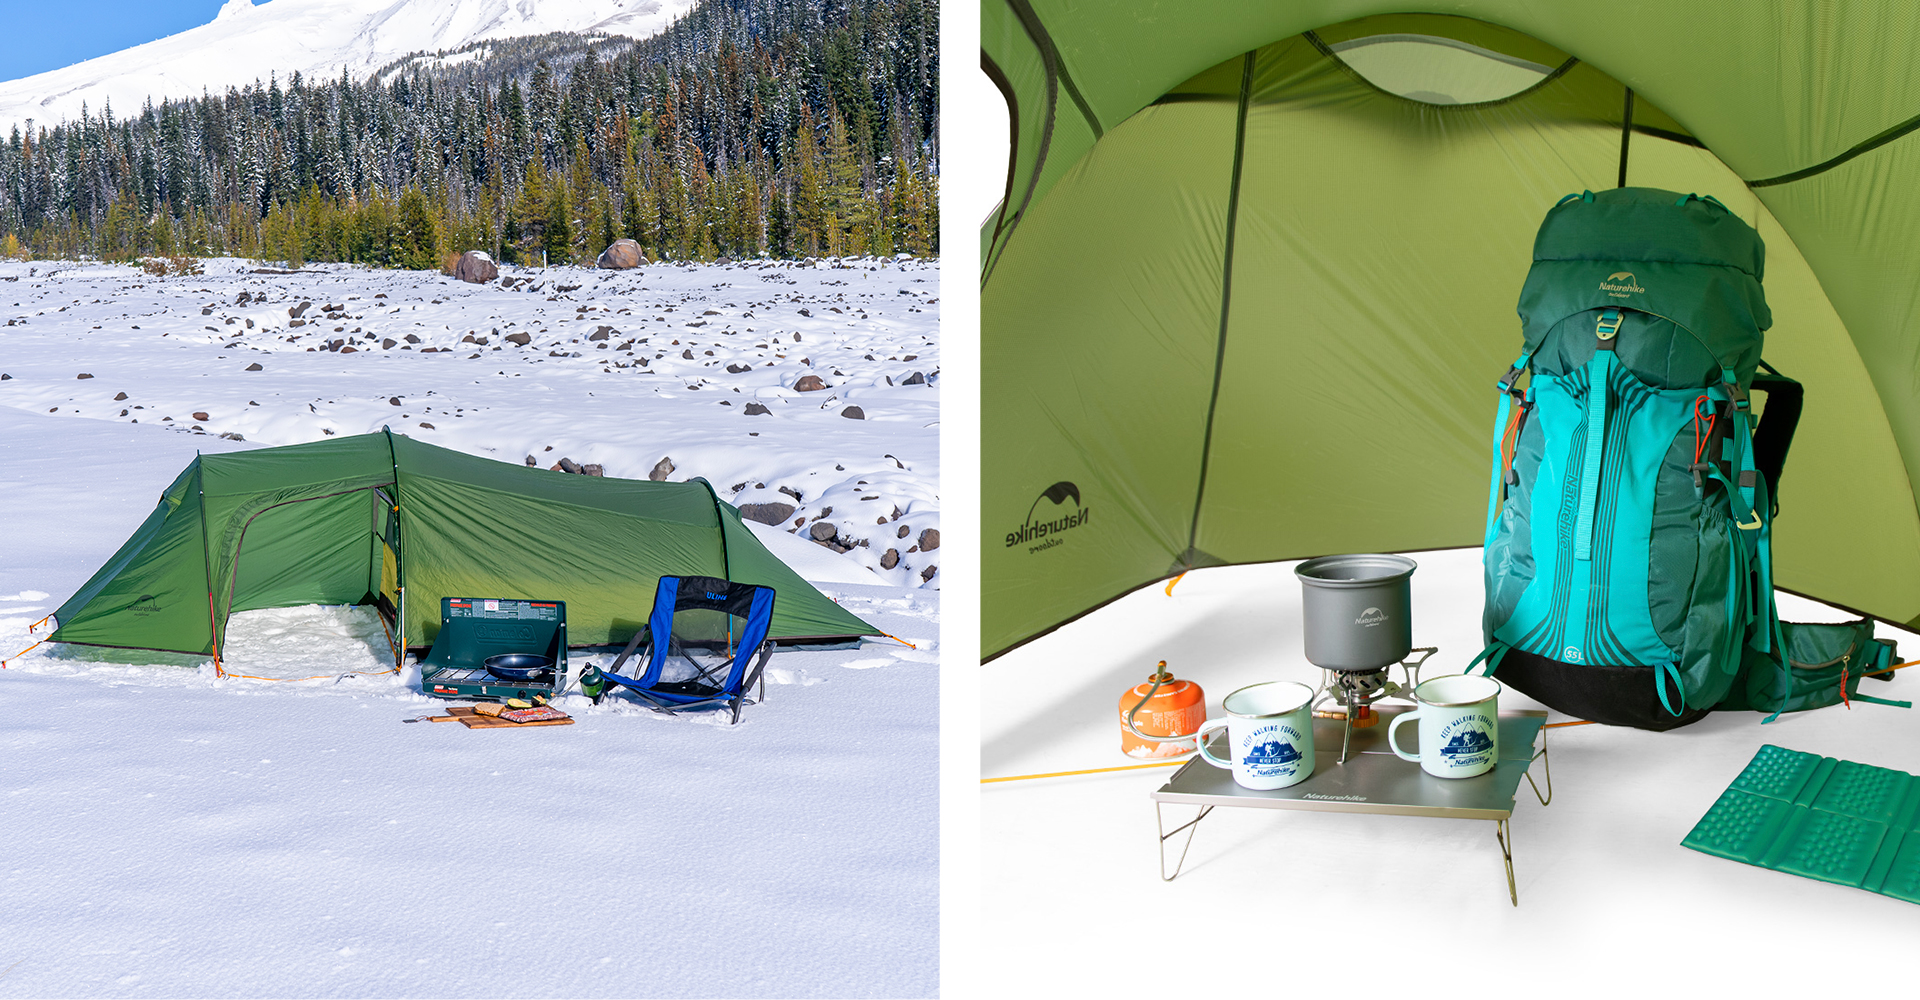 This image shows using a tunnel tent while winter camping